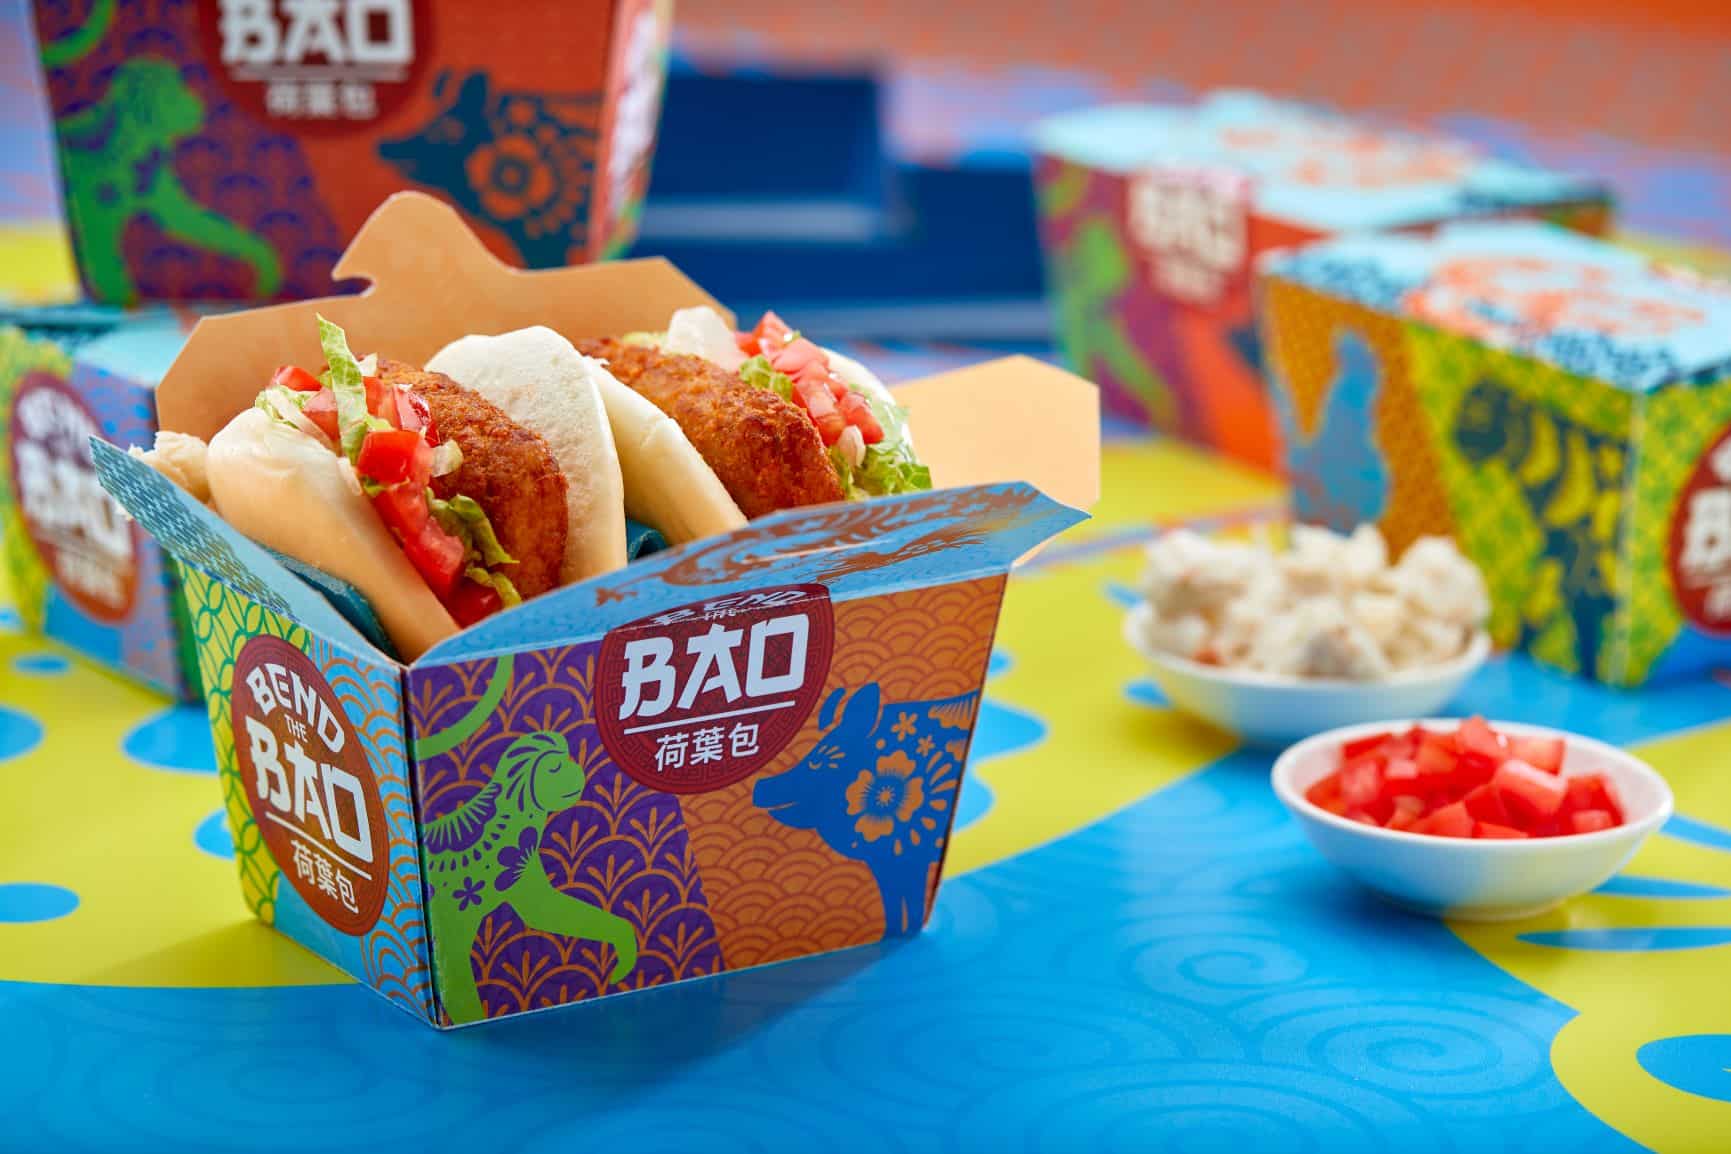 Universal Orlando Resort opened an all-new quick service food venue called Bend The Bao at Universal CityWalk